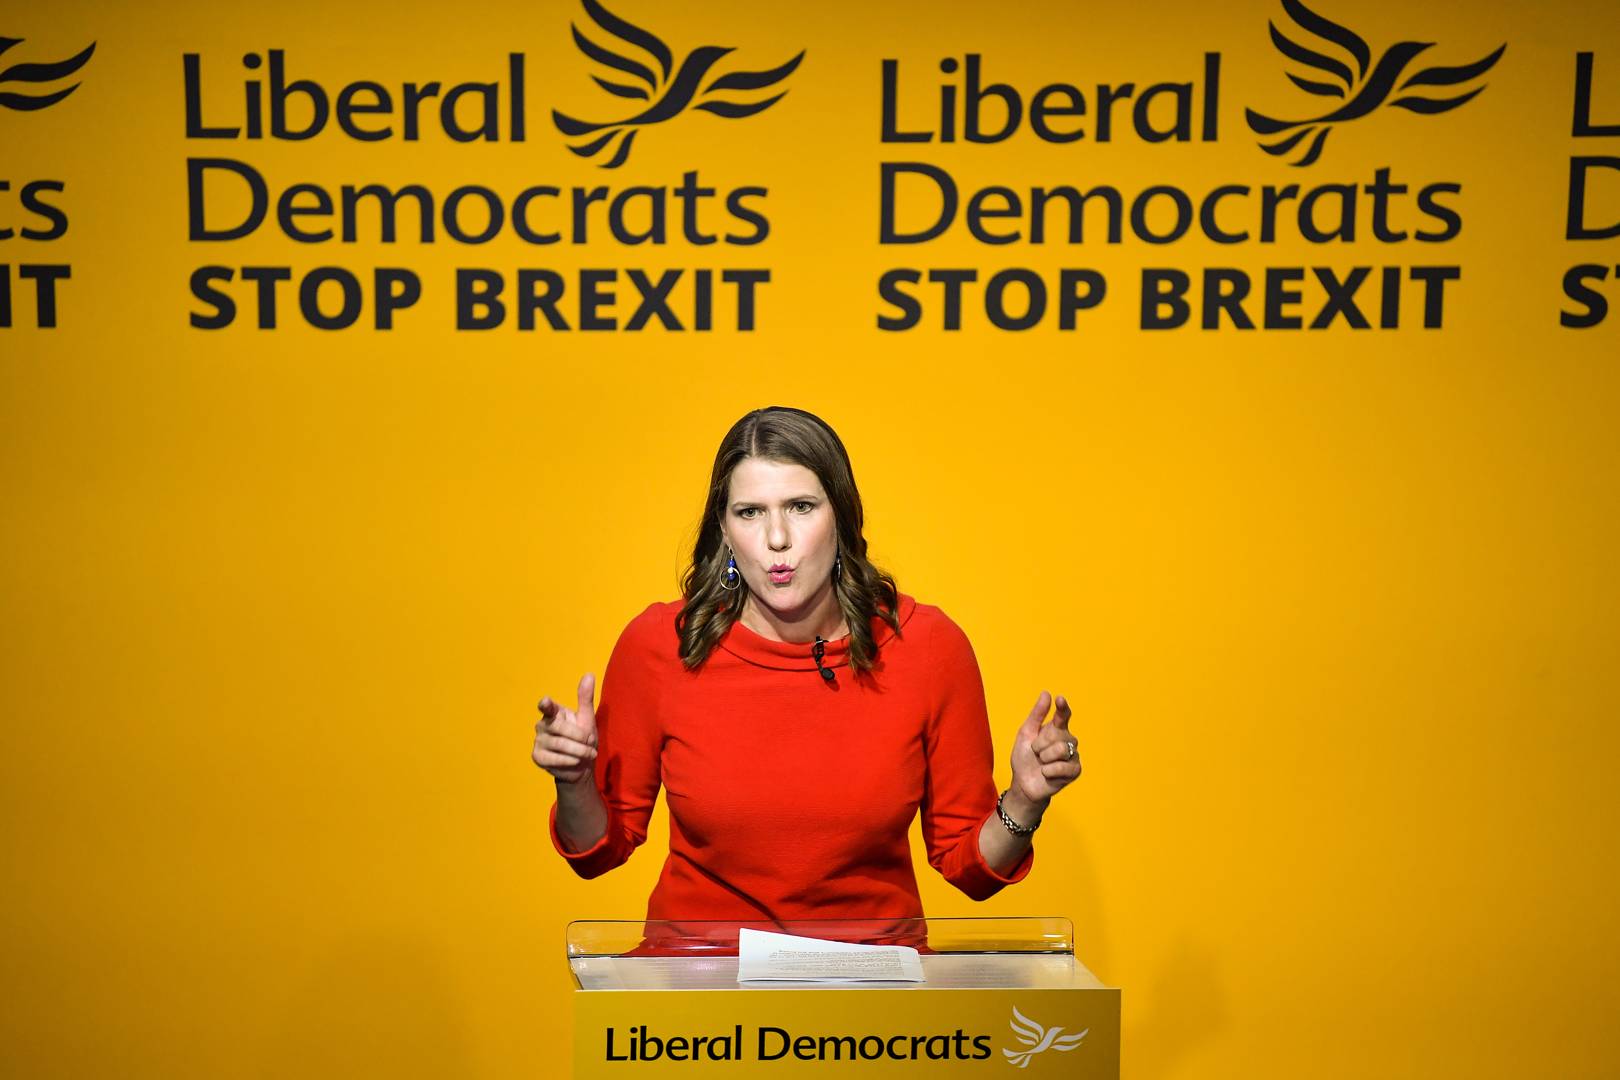 The Lib Dems are still winning the general election fight on Facebook